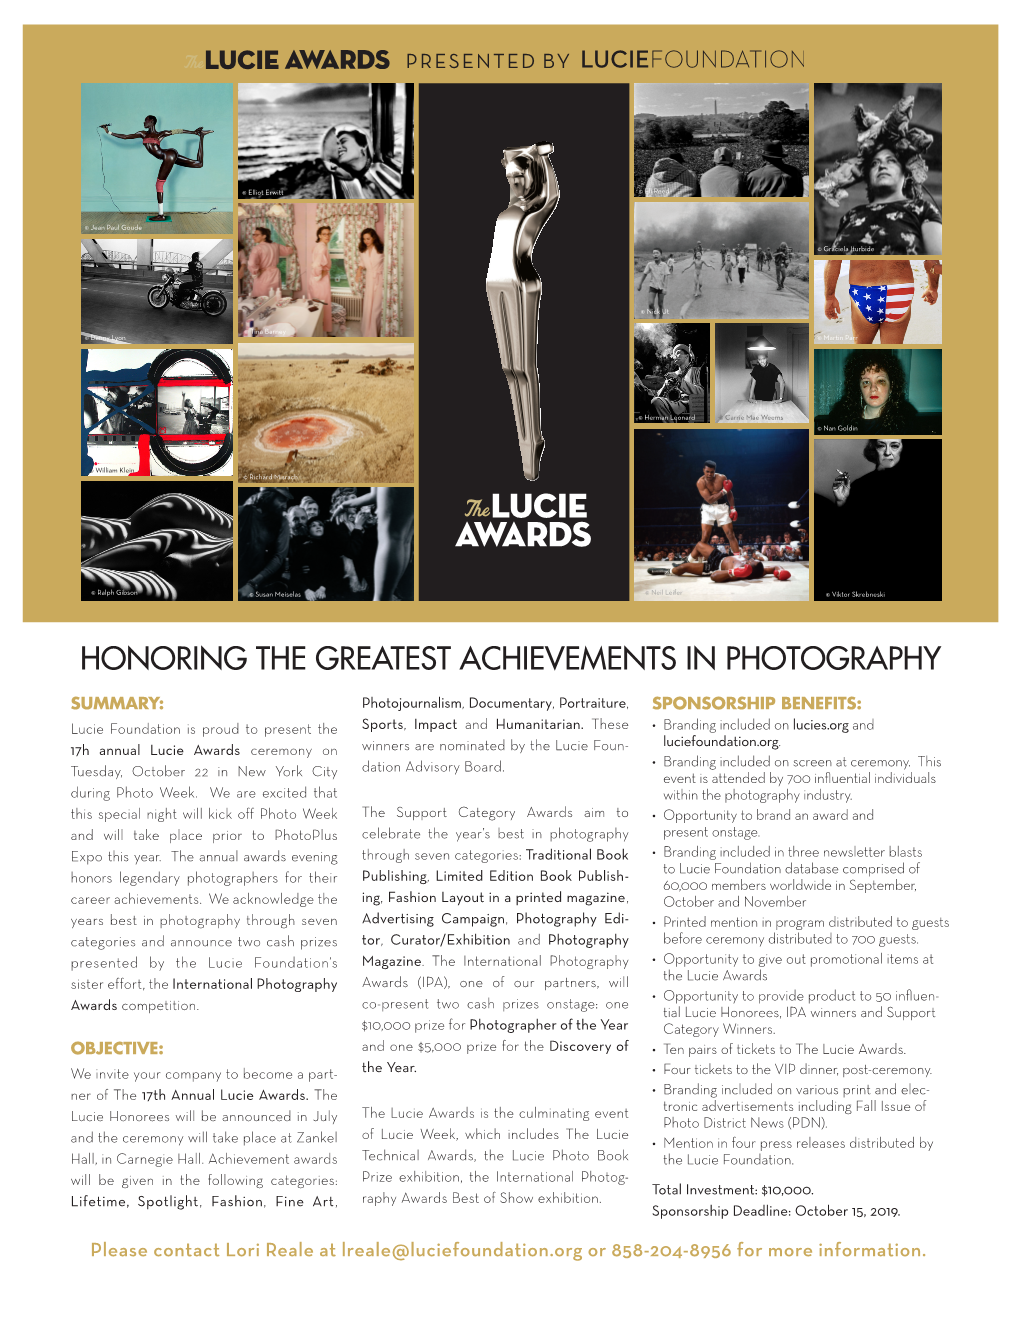 Honoring the Greatest Achievements in Photography